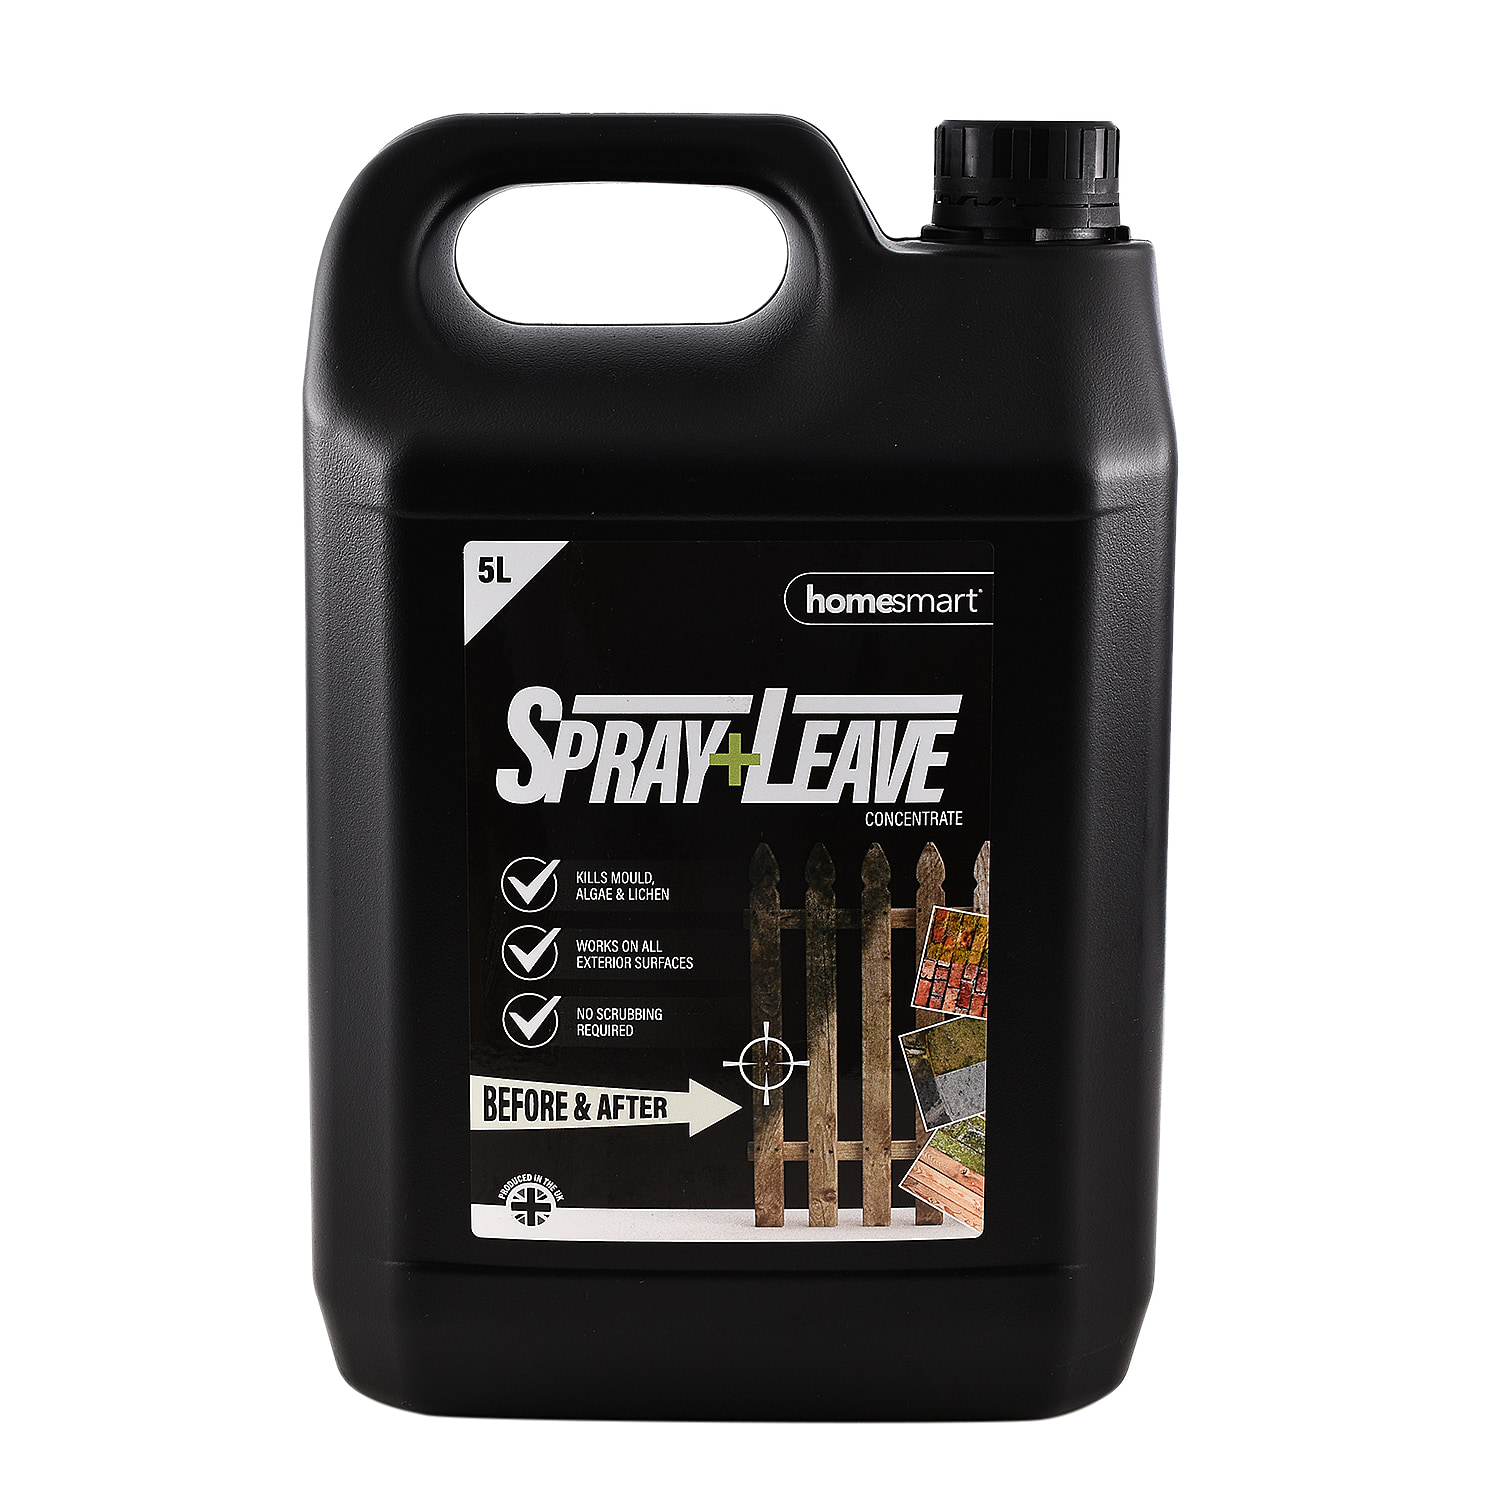 Homesmart Spray & Leave Patio Cleaner Concentrate - 5L (Makes up to 25 Litres)